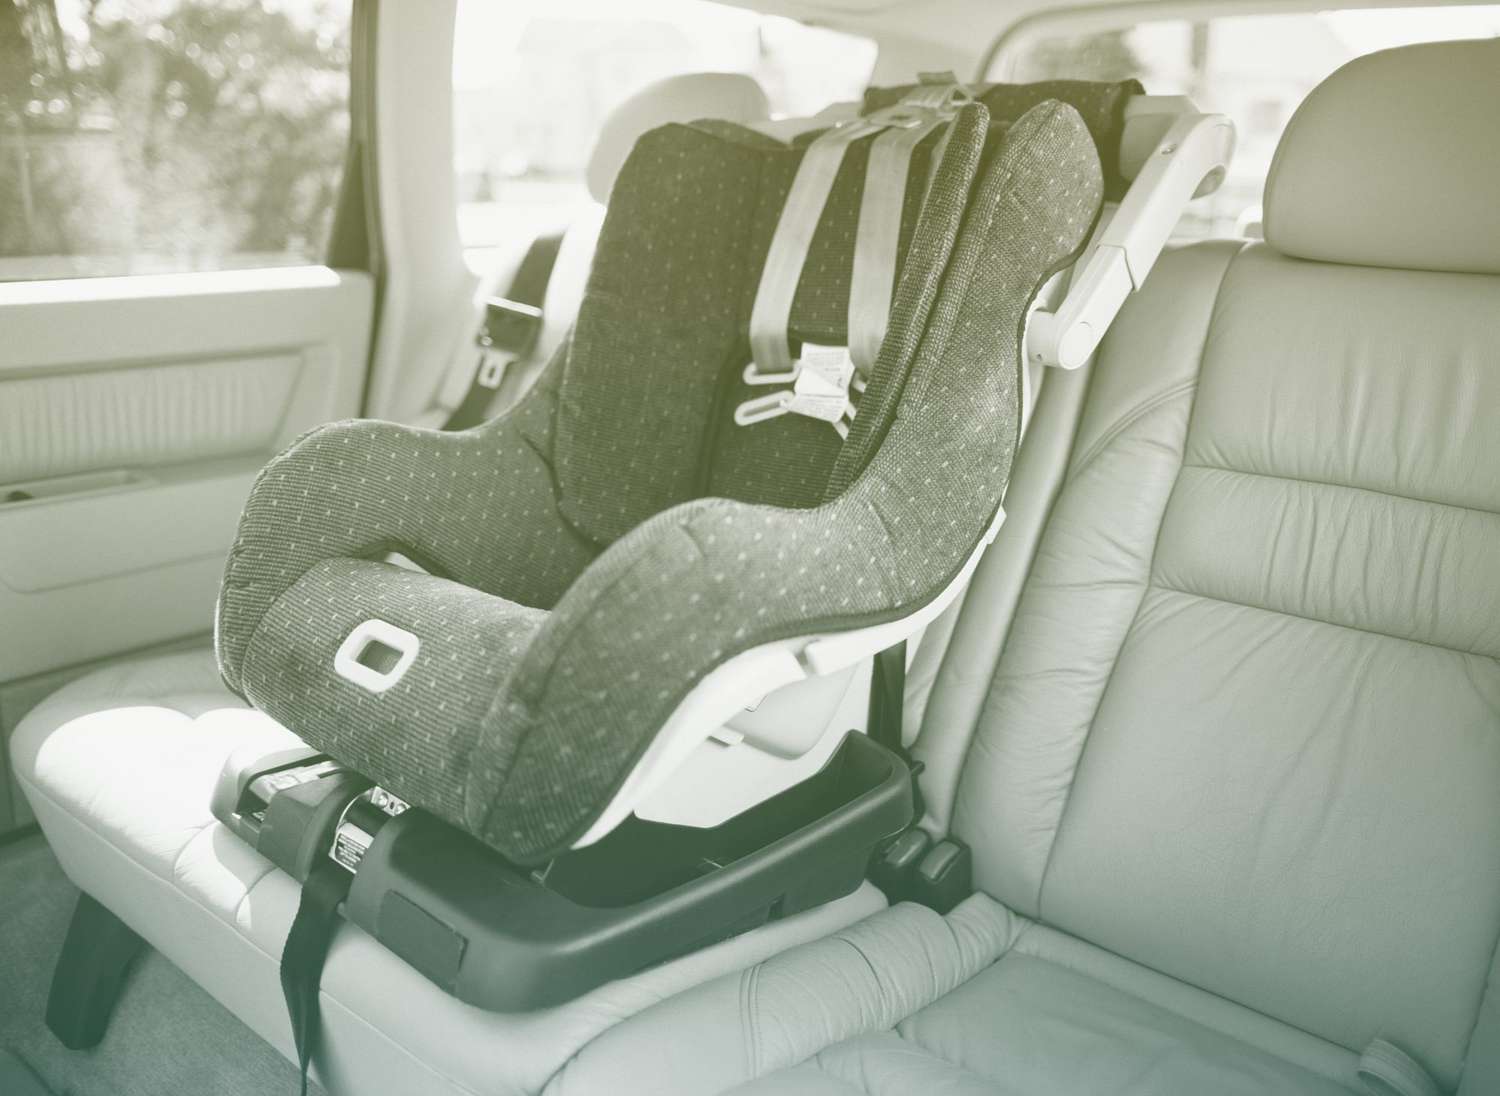 The Best Ways To Clean Car Seats Pas - How To Clean Seat Covers